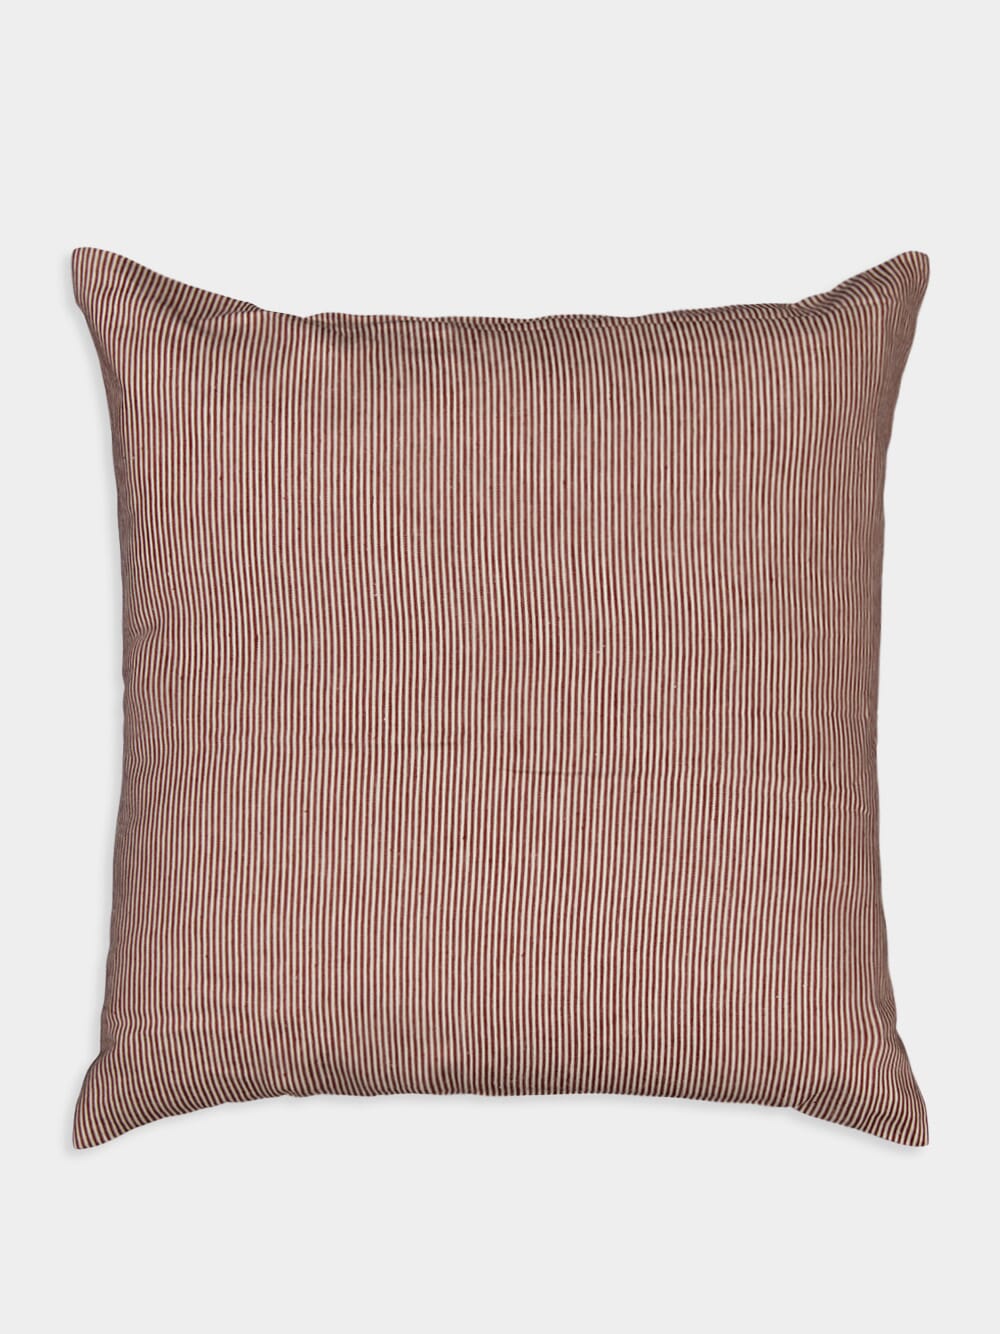 LibecoSwimmers Stripe Pillow at Fashion Clinic